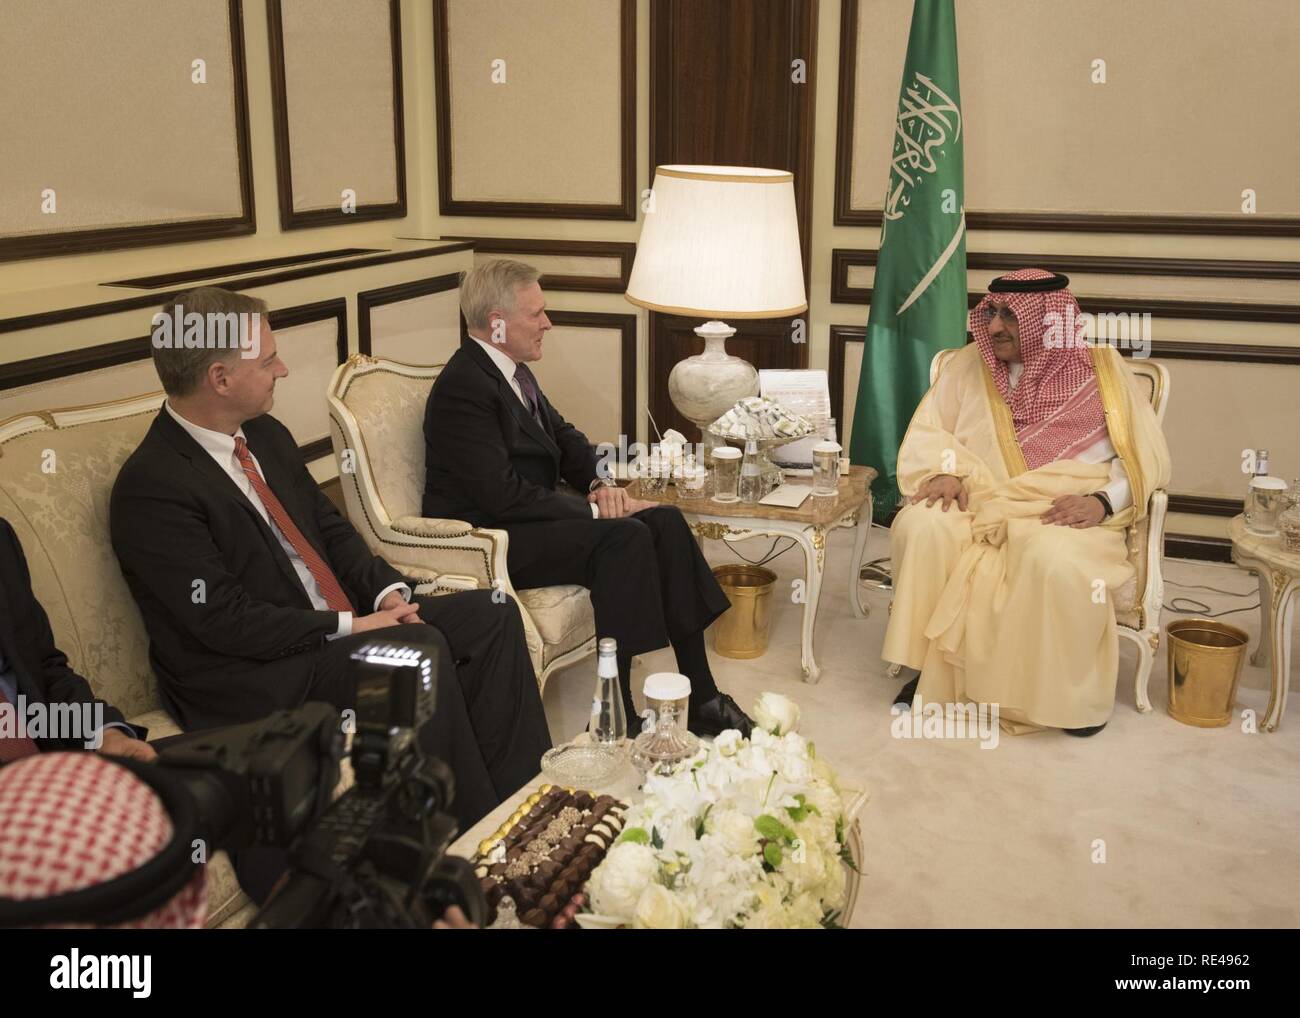 DAMMAM, Saudi Arabia (Nov. 27, 2016) Secretary of the Navy (SECNAV) Ray Mabus meets with Crown Prince of Saudi Arabia, Muhammad bin Nayef. Mabus is in the area as part of a multinational tour to meet with Sailors and Marines, and government and military leaders. Stock Photo